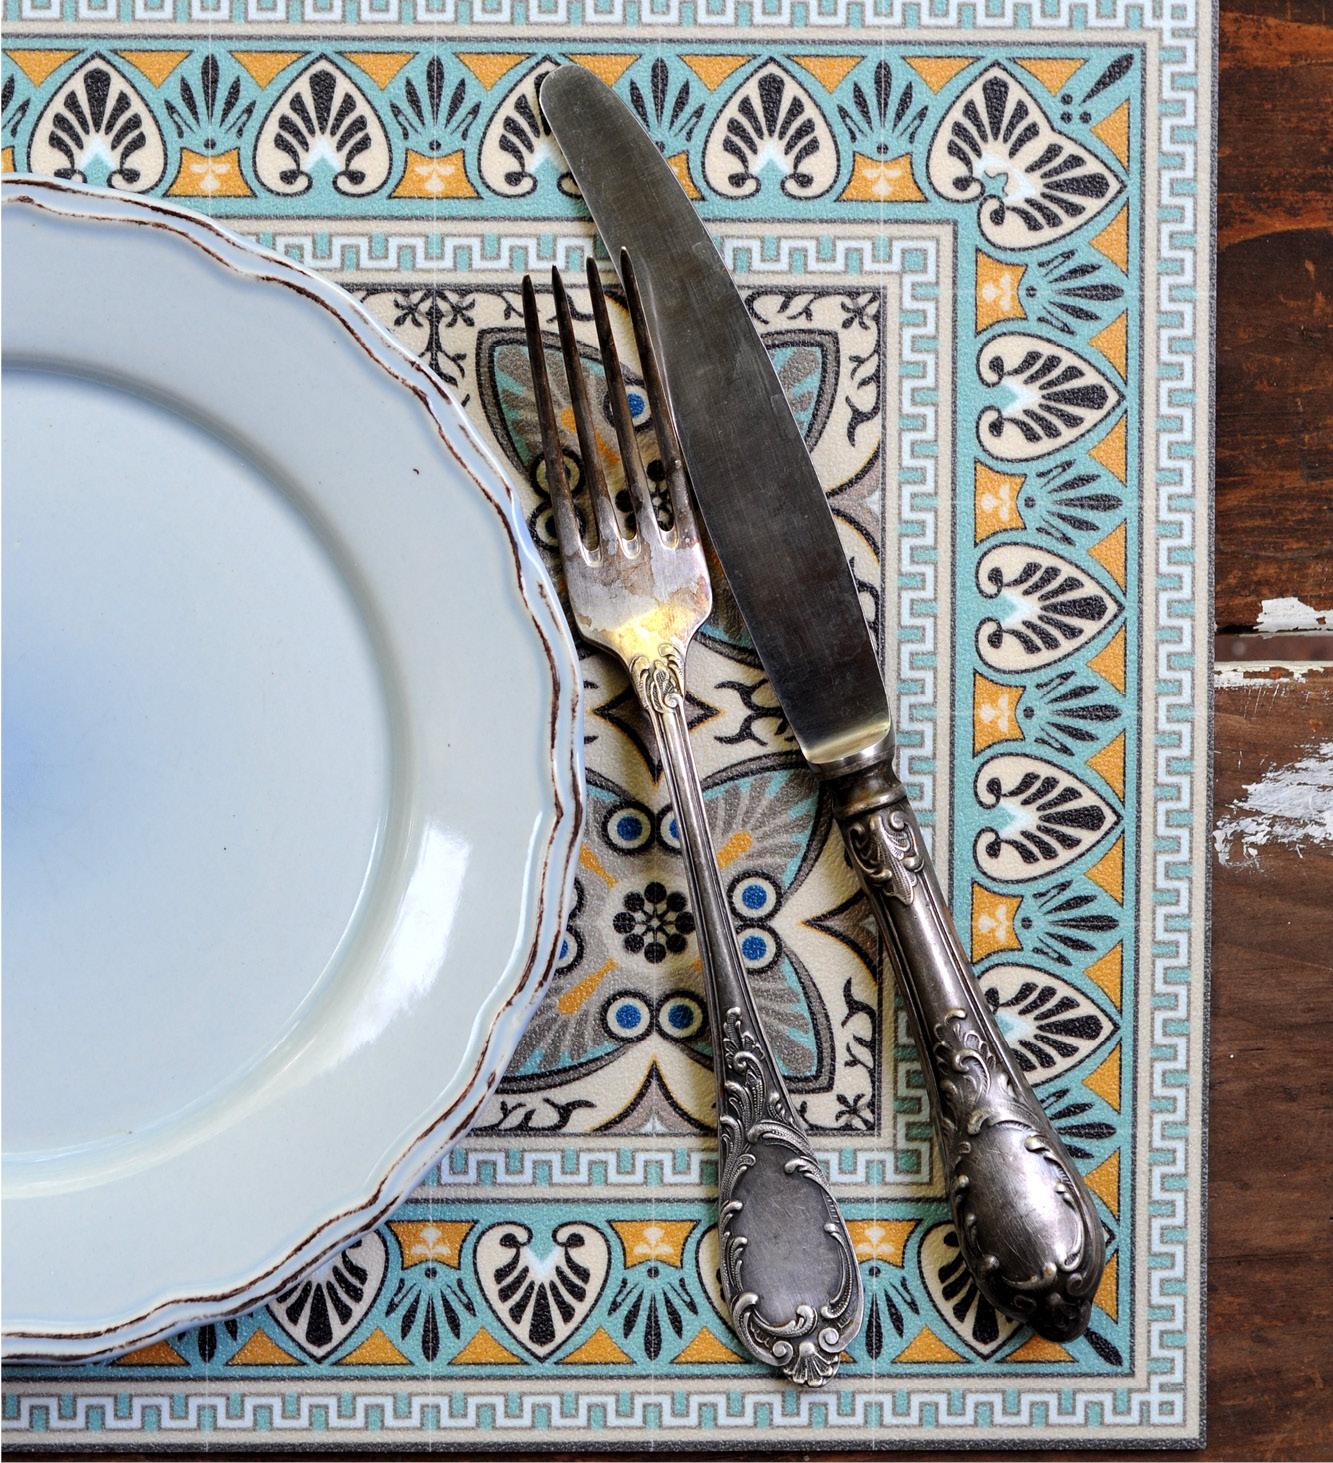 A table runner with a colorful African style print placed under a dinner set 